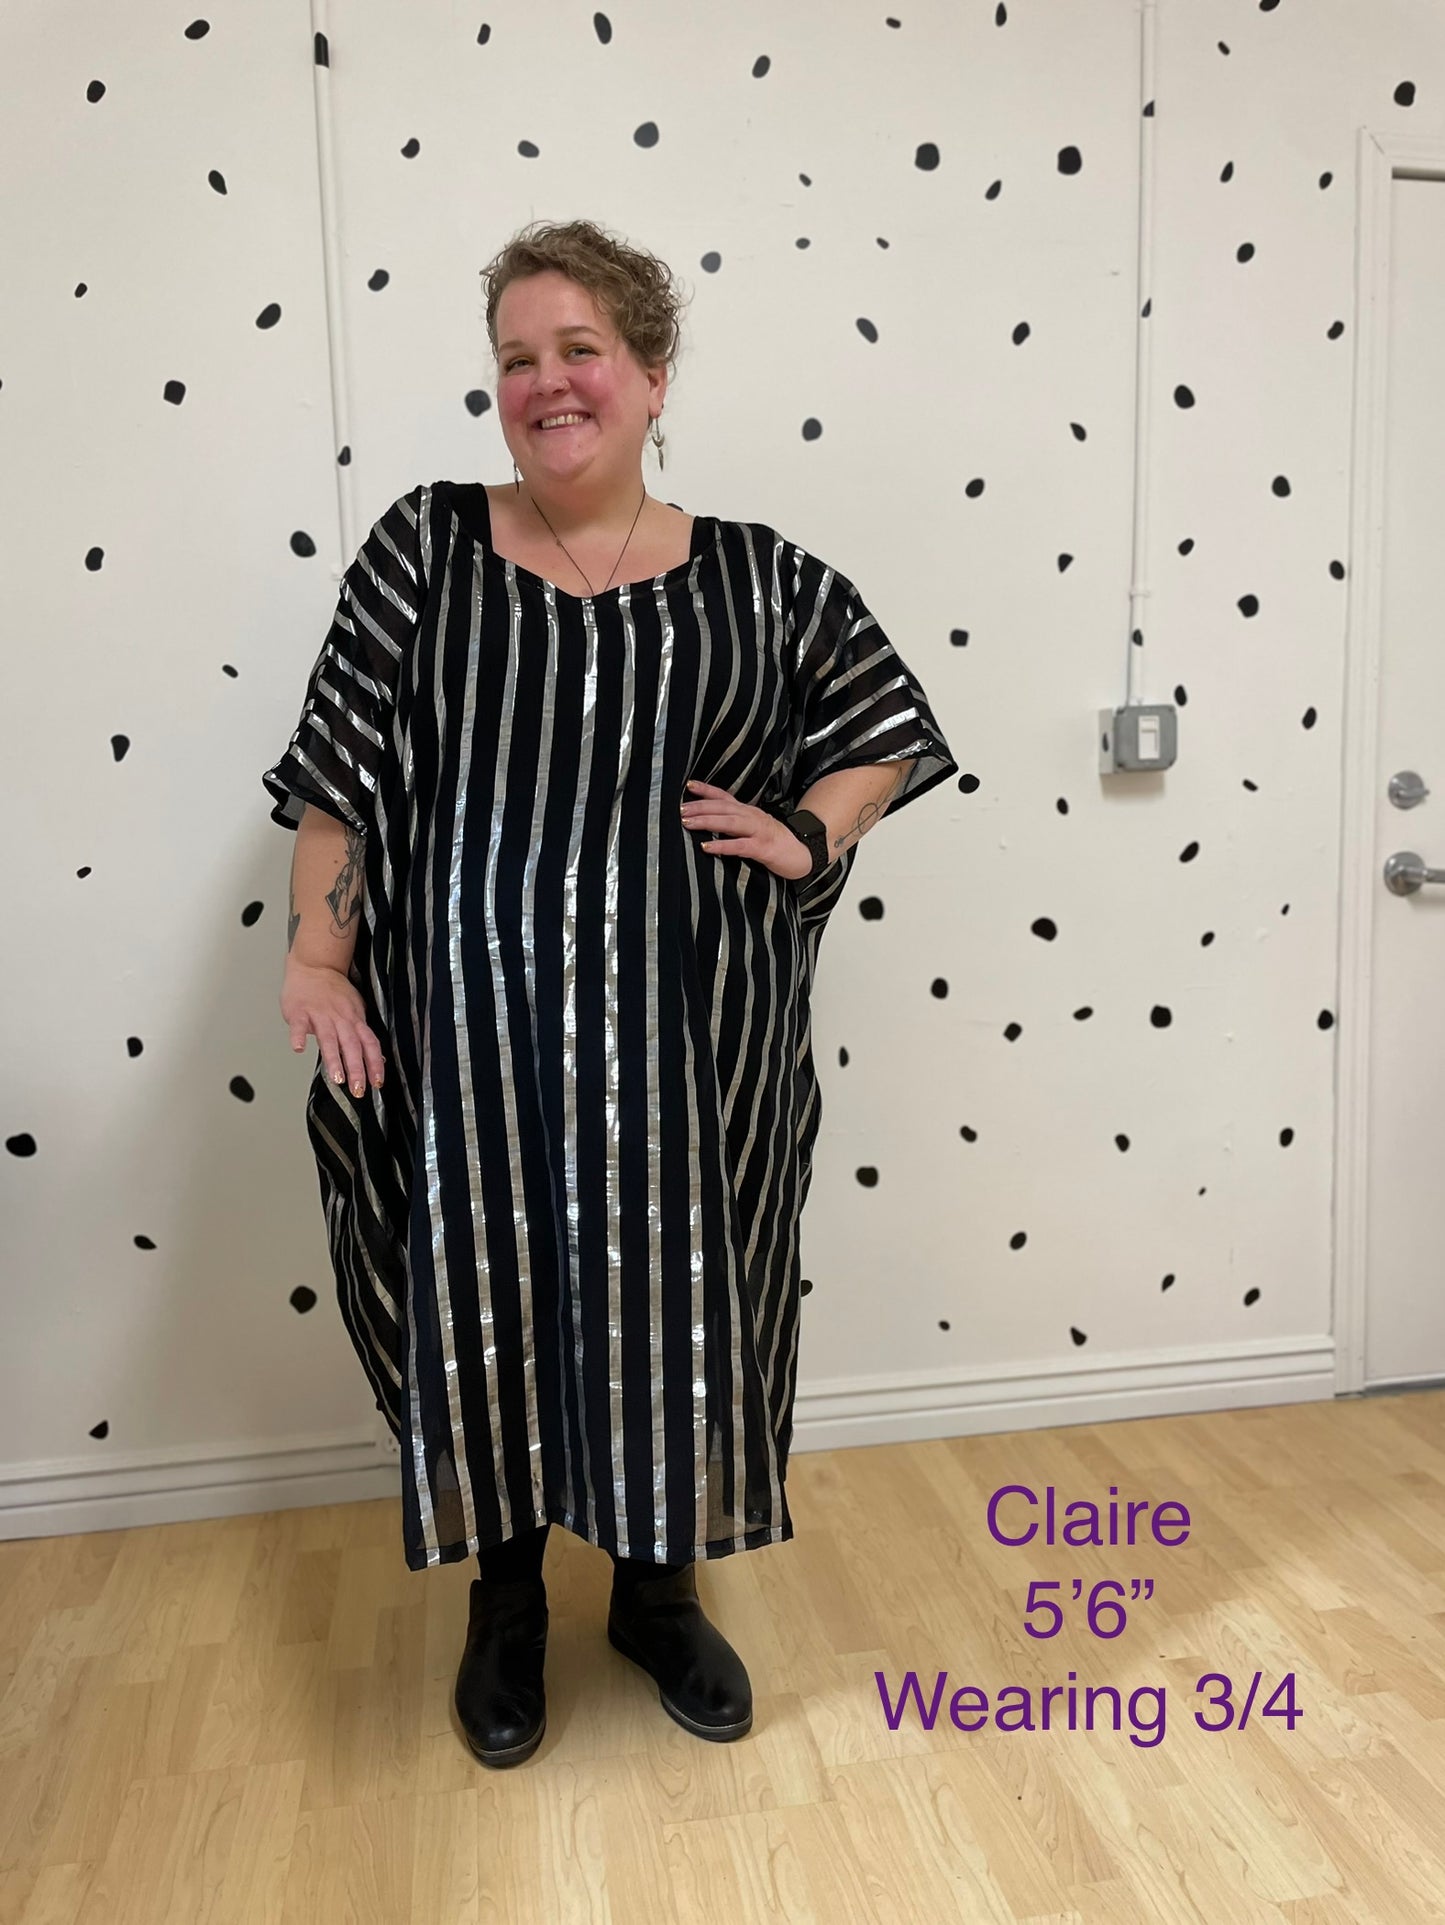 Black kaftan with silver stripes showing the model in size 3/4